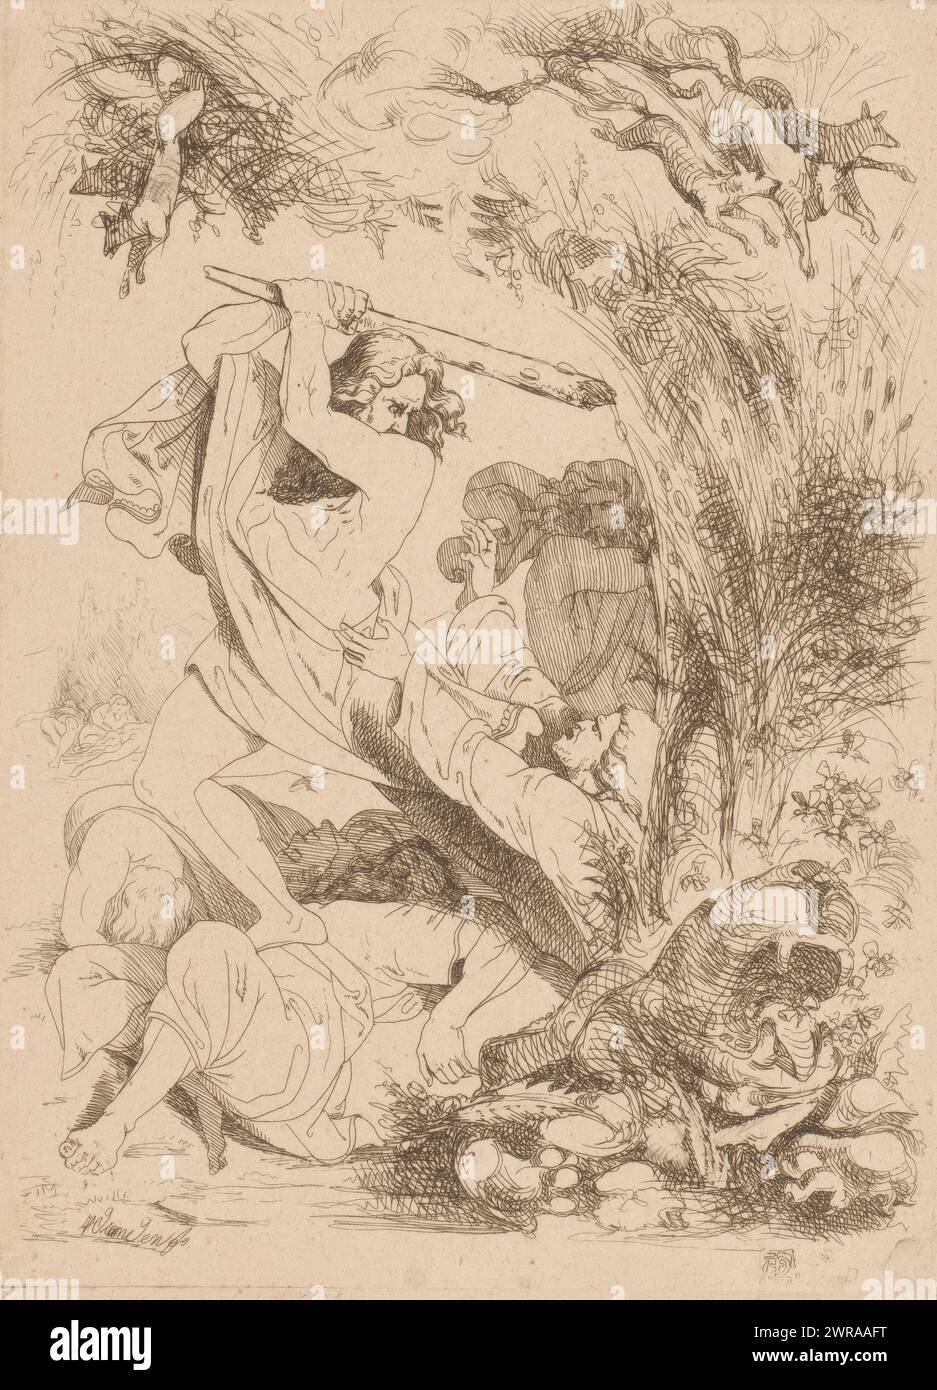 Samson Defeats the Philistines, Anger (Ira), Deadly Sins and the Fall (series title), print maker: Heinrich Vianden, print maker: Franciscus Andreas Durlet, Belgium, (possibly), 1844, paper, etching, height 183 mm × width 135 mm, print Stock Photo